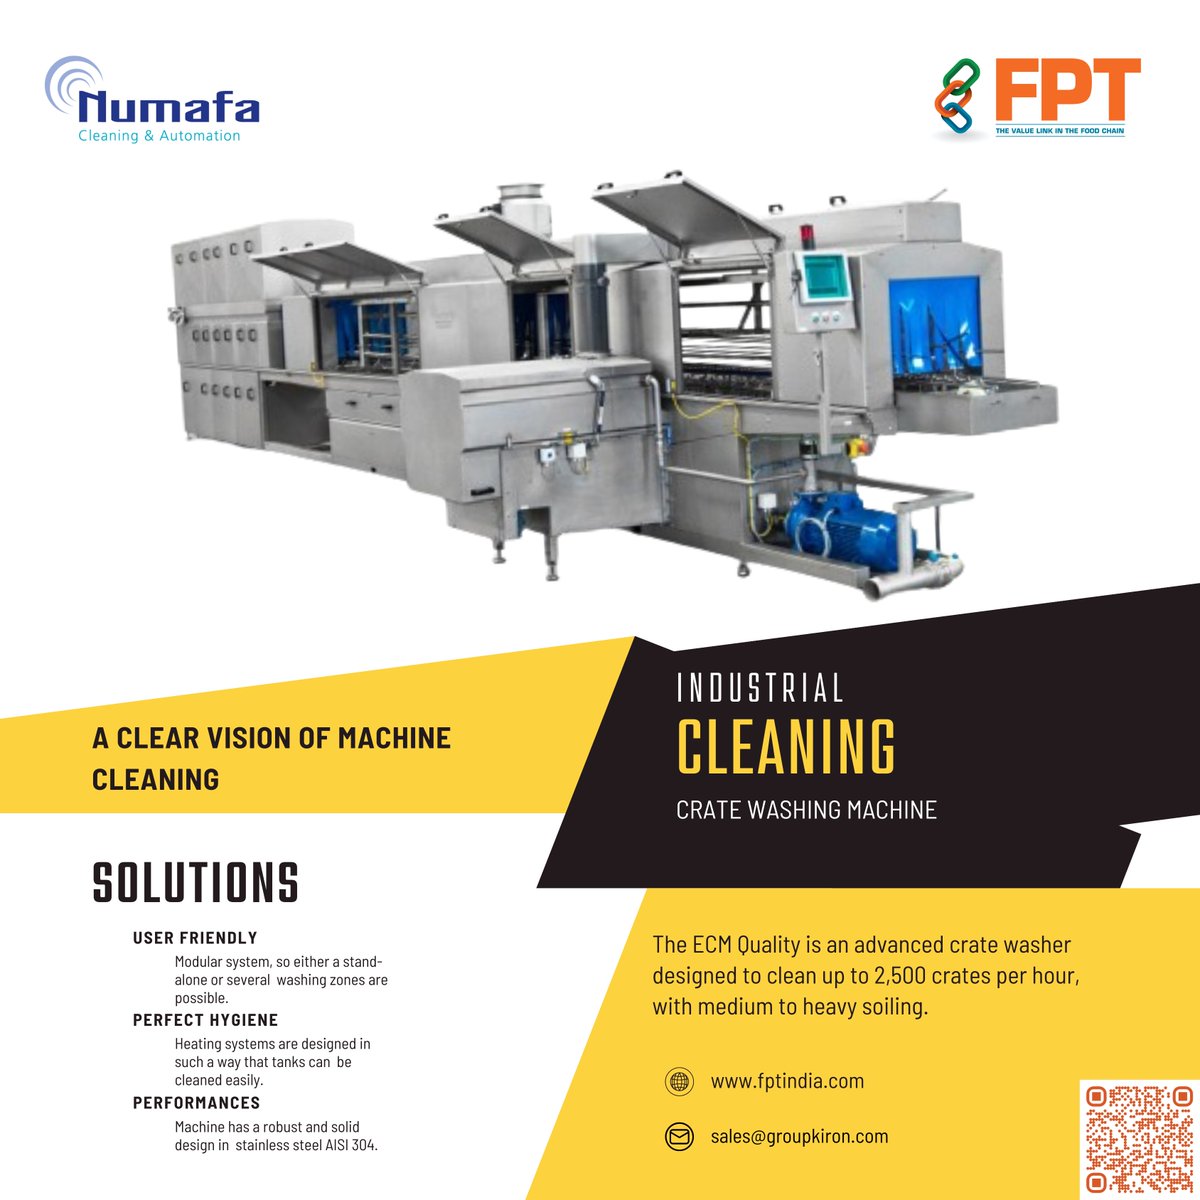 The Numafa Cleaning & Automation's ECM Quality is an advanced crate washer designed to clean up to 2,500 crates per hour, with medium to heavy soiling.
 
 Delve deeper into our expertise on our blog: fptindia.com/blog/crate-was…

#cratewasher #industrialwasher